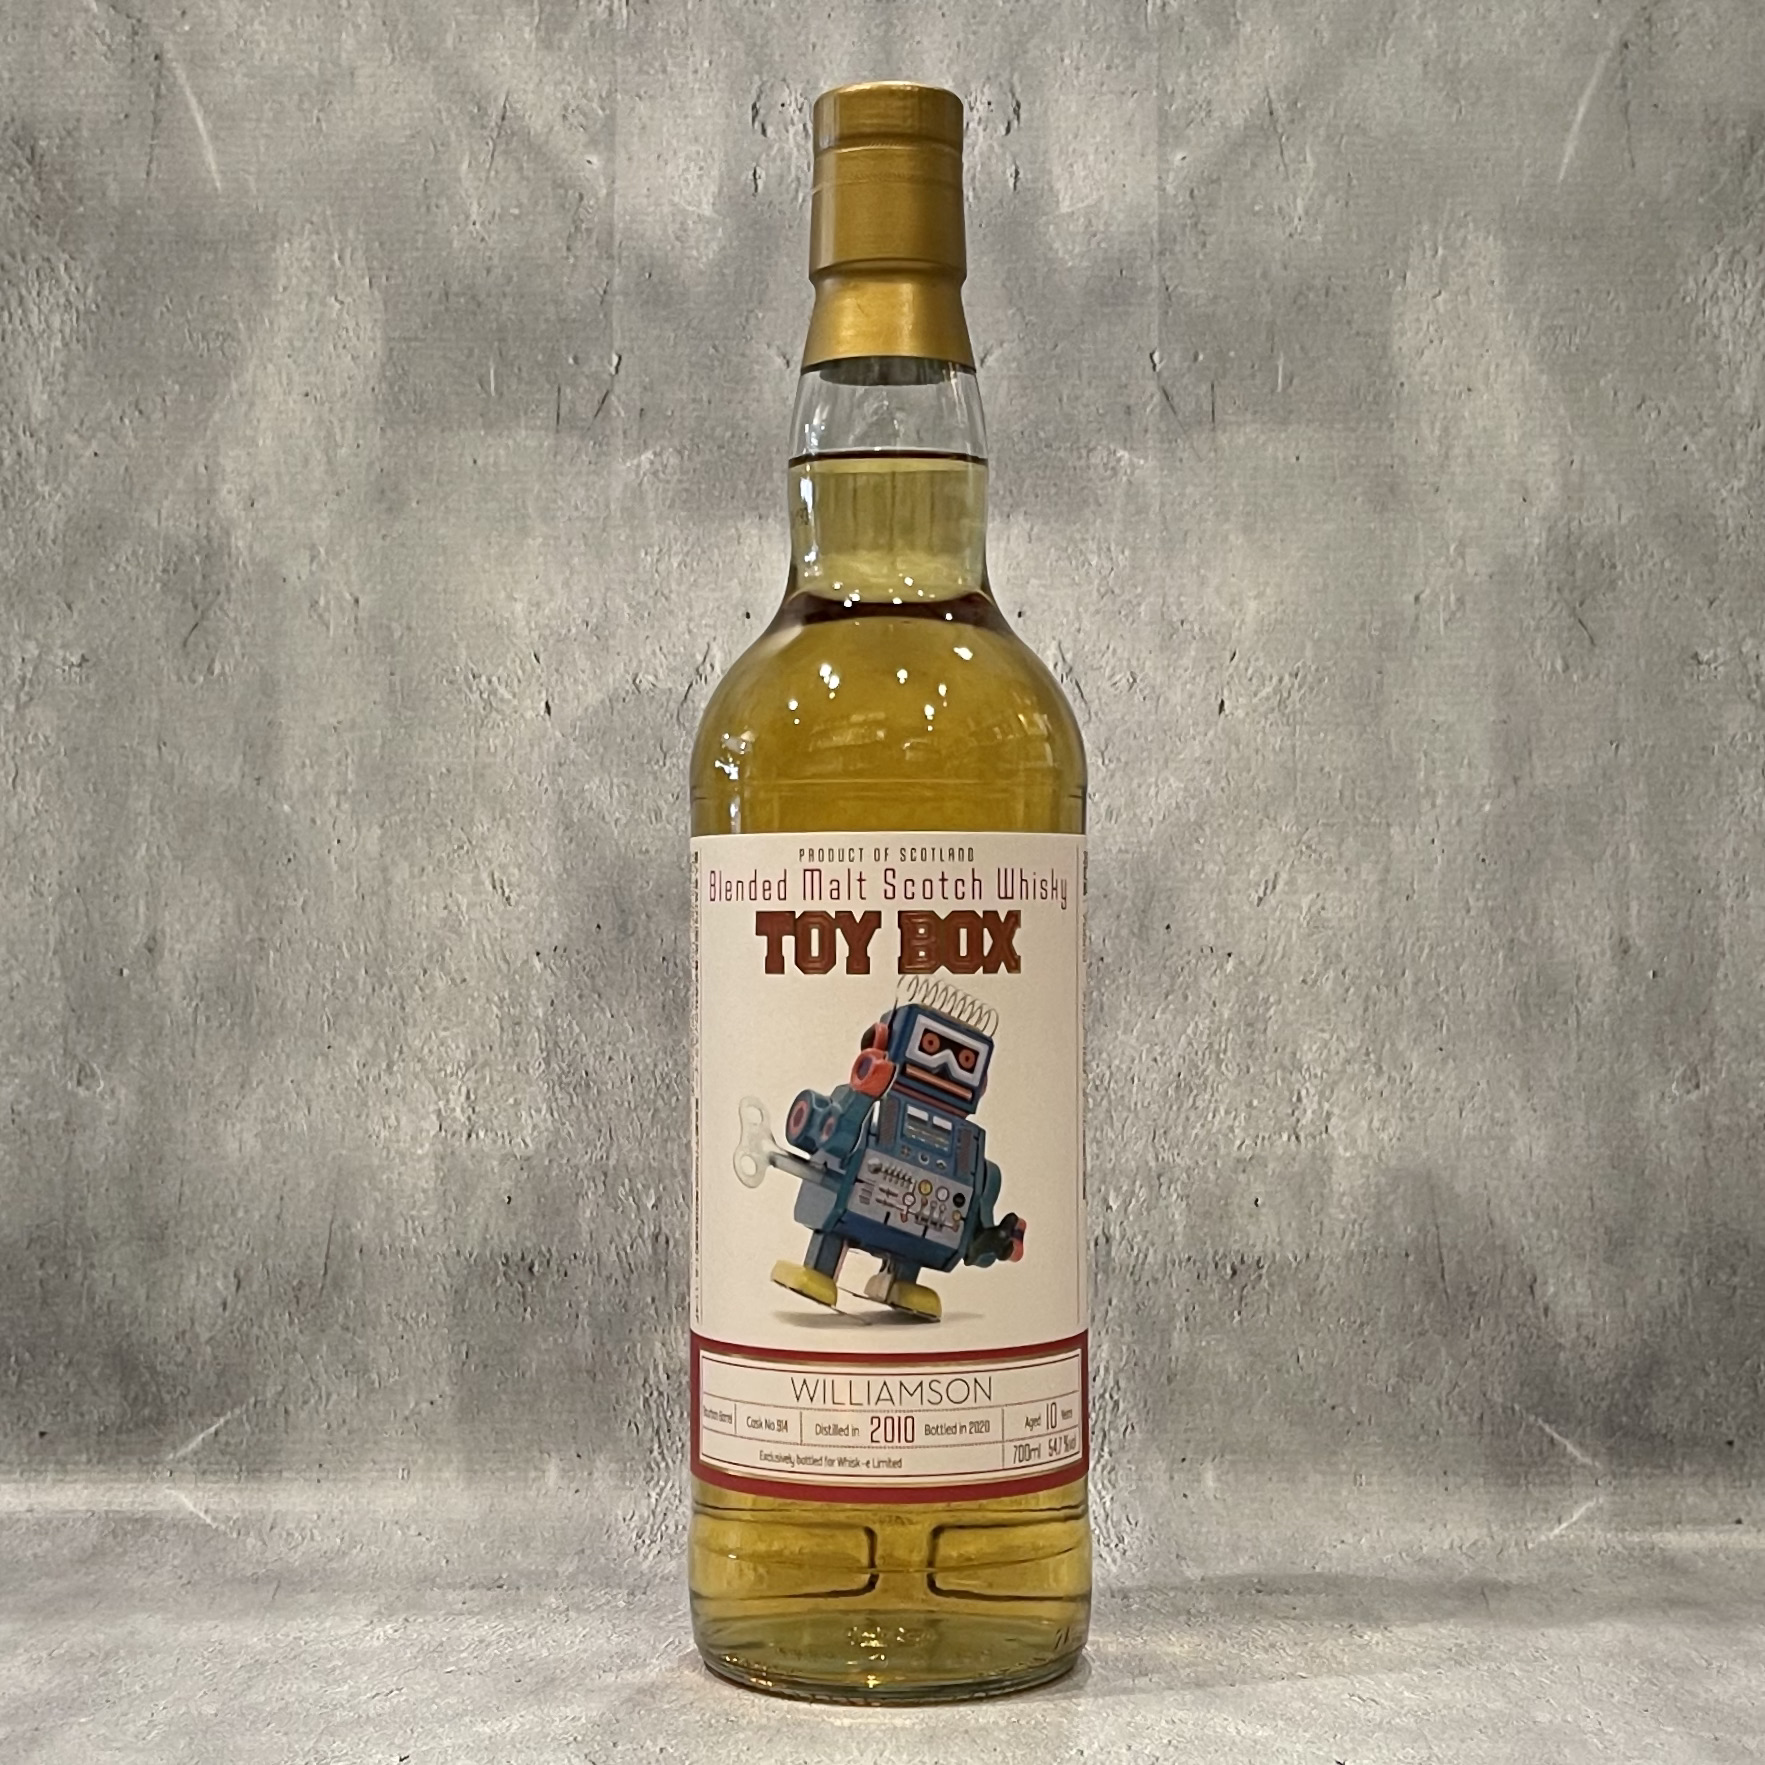 WHISKY LOVERS ONLINESHOP / ウィリアムソン 2010 10年 トイボックス